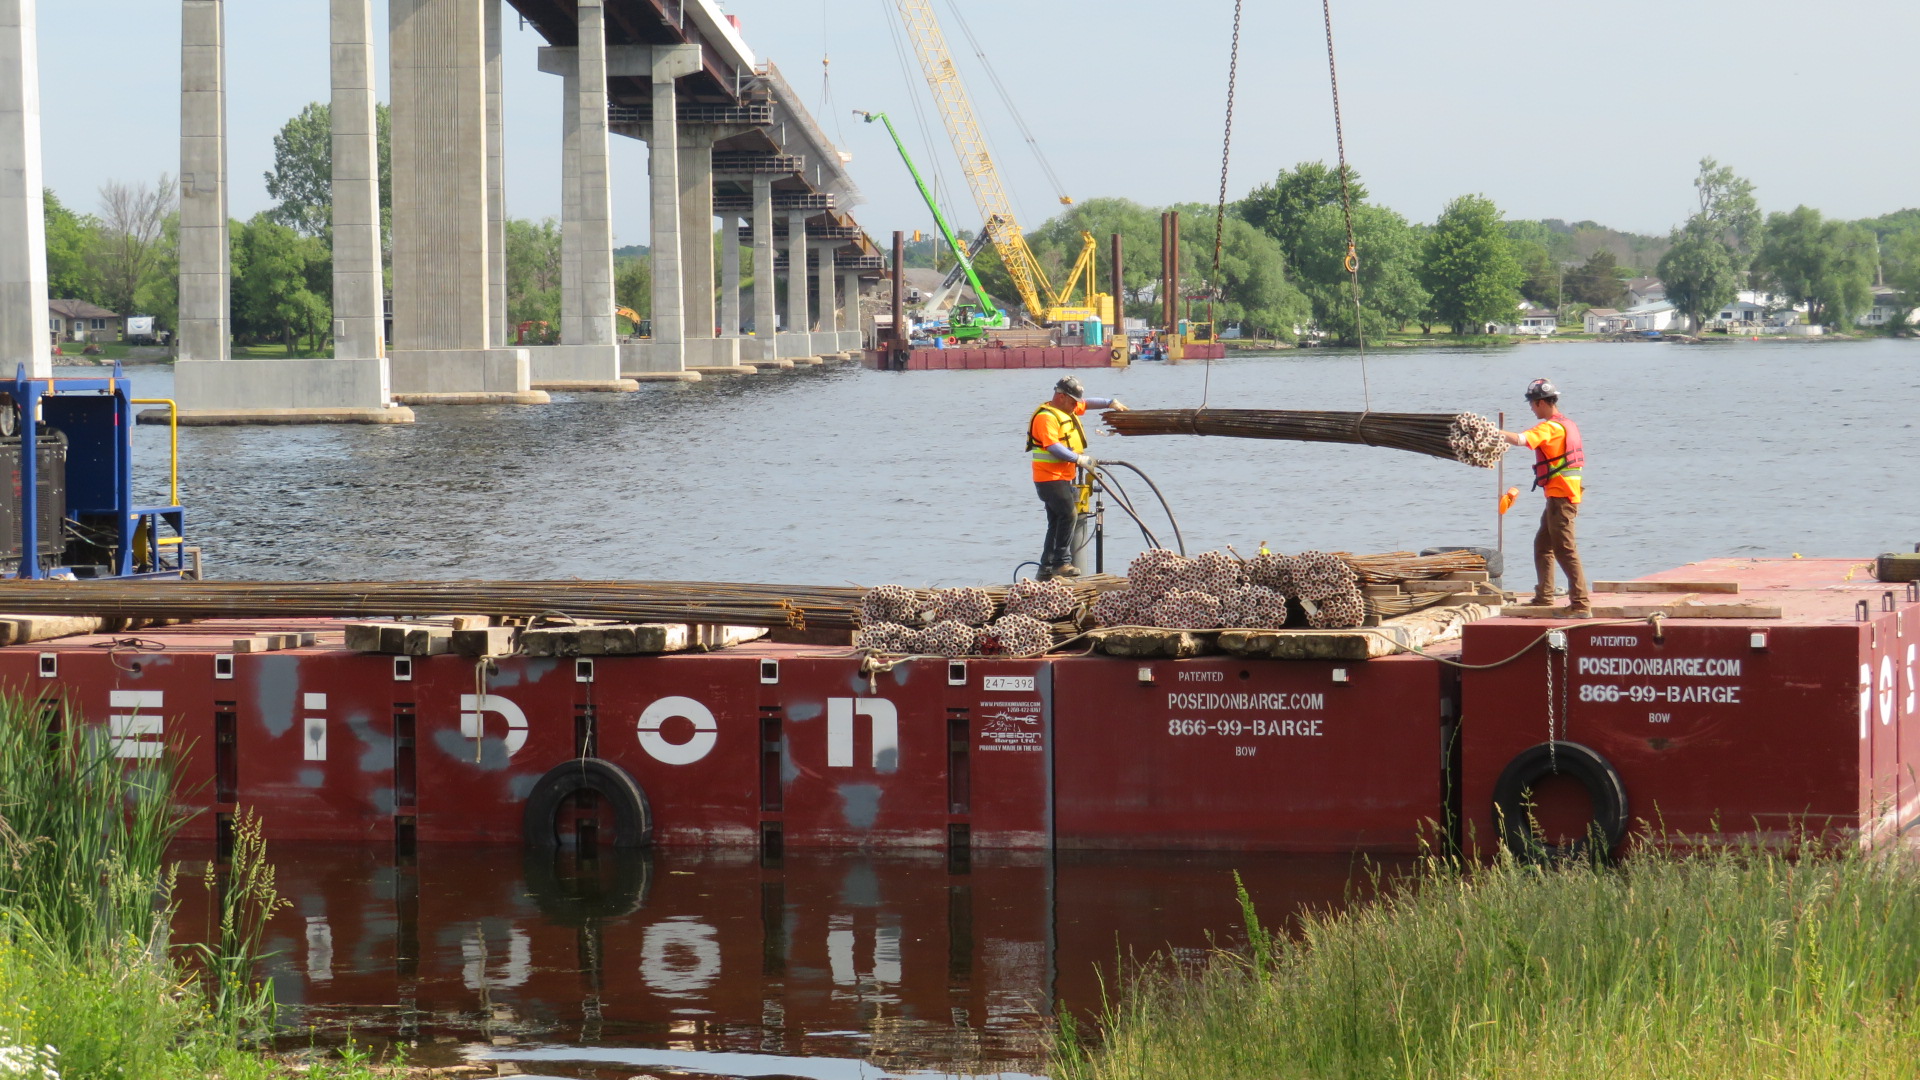 Lowering the rebar to the barge